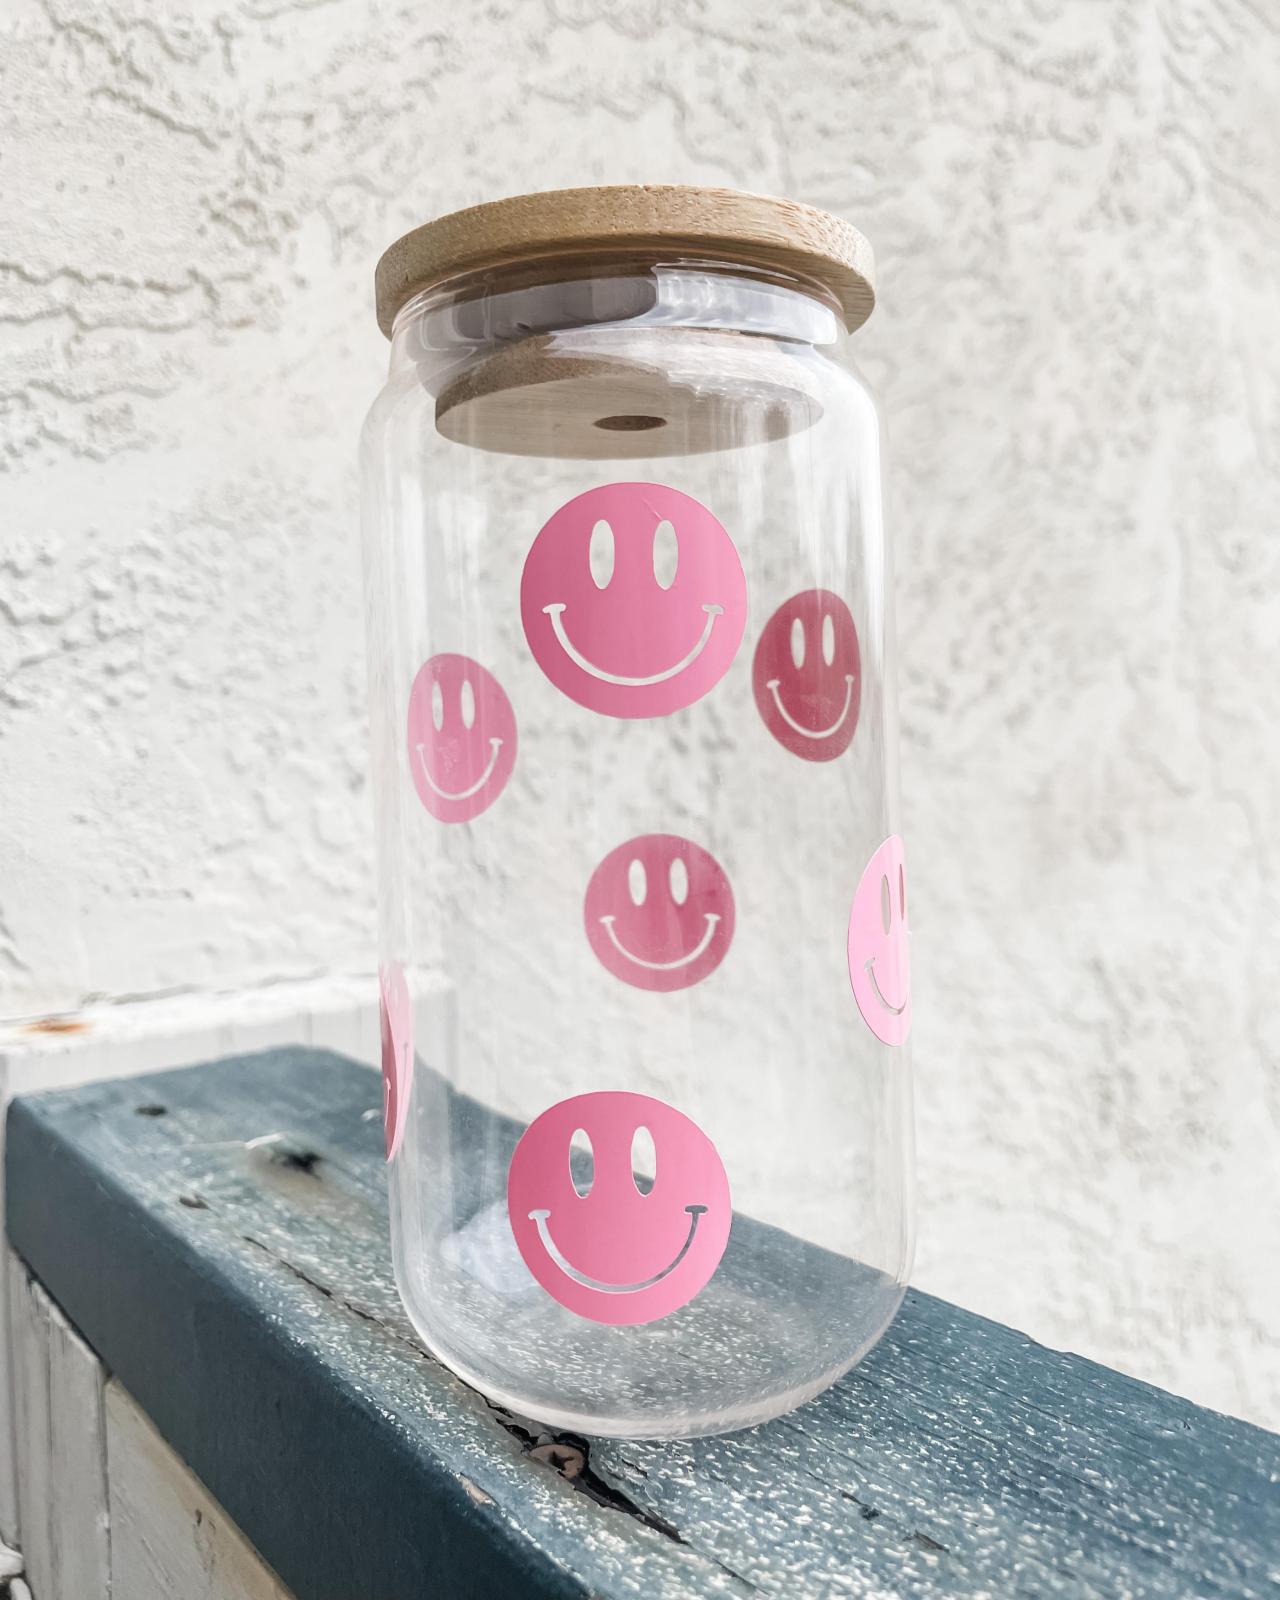 Pink Smiley face beer glass can, Happy face beer glass can, Smiley face cup, Ice coffee glass cup, soda can glass, Beer glass can cup